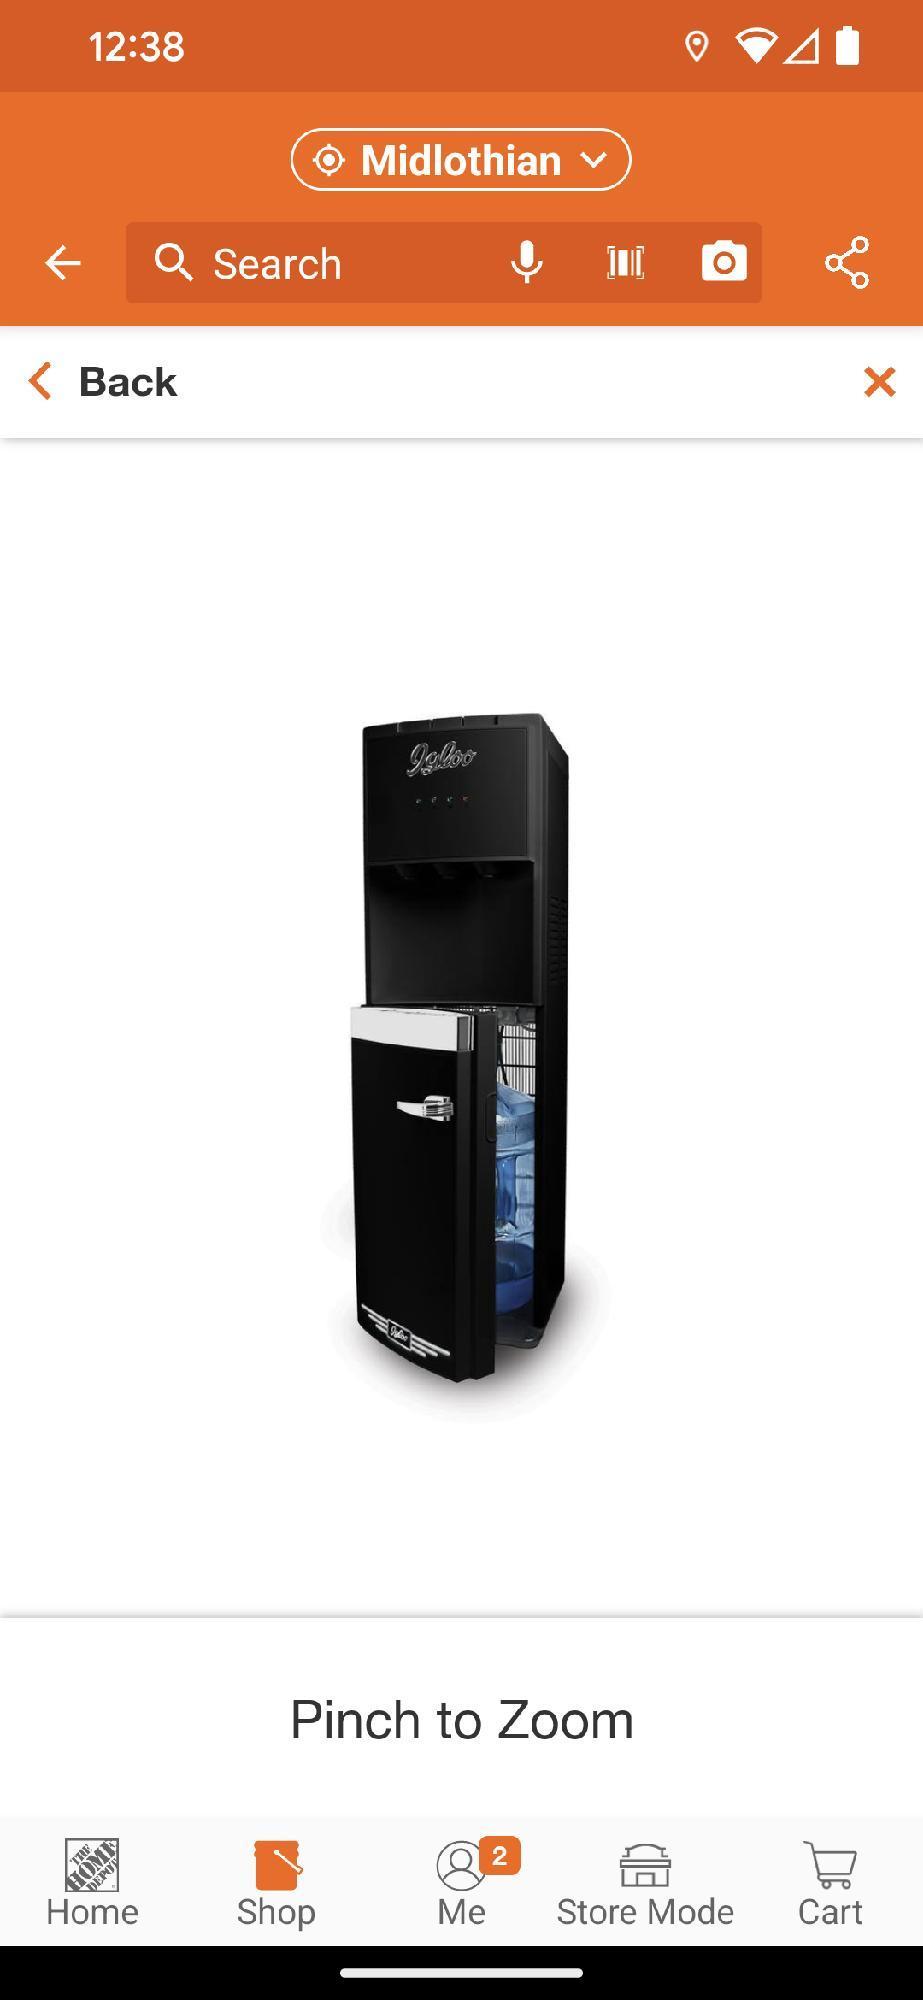 IGLOO 5 Gal. Bottom Load Water Cooler In Black, Appears to be Used Out of the Box, Retail Price